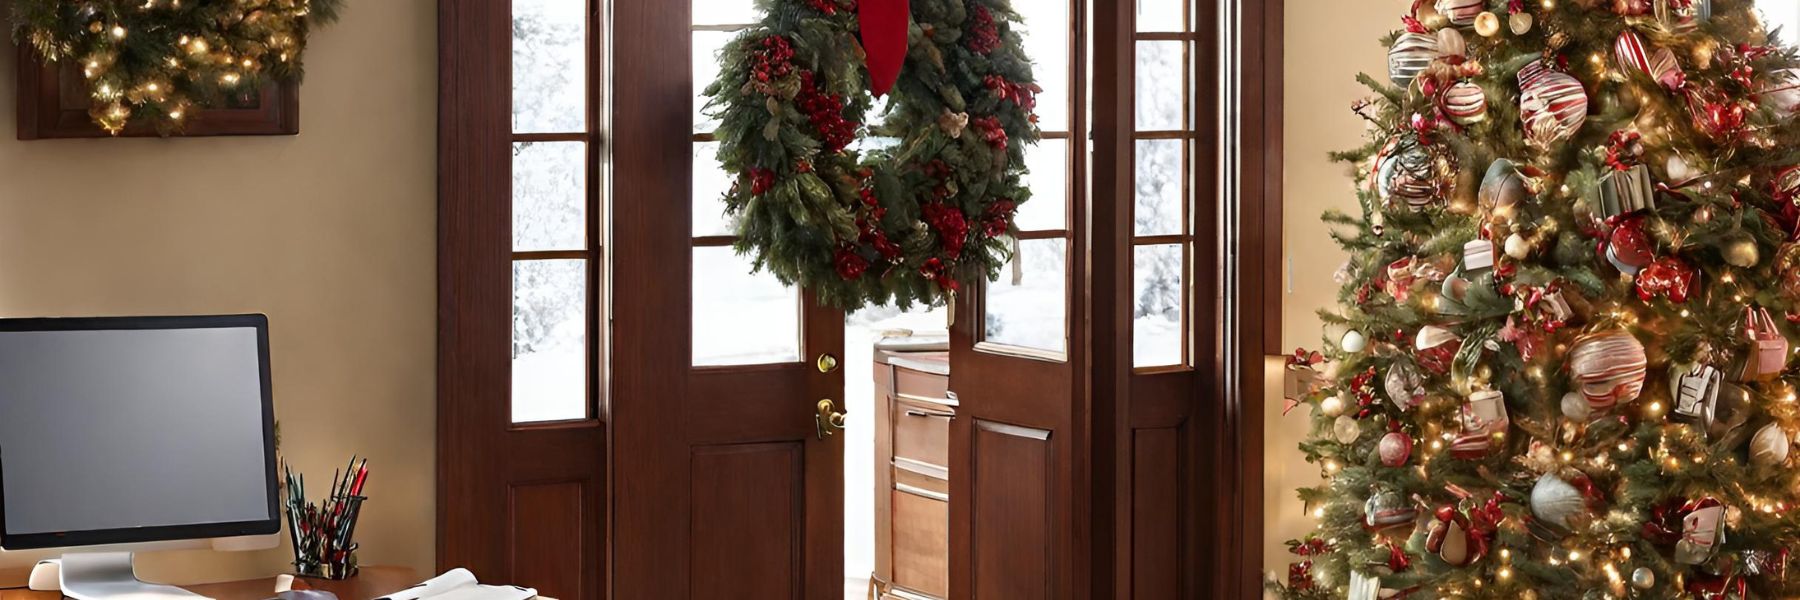 Christmas Office Door Decorating Ideas: 50 Festive Ways to Spruce Up Your Workspace